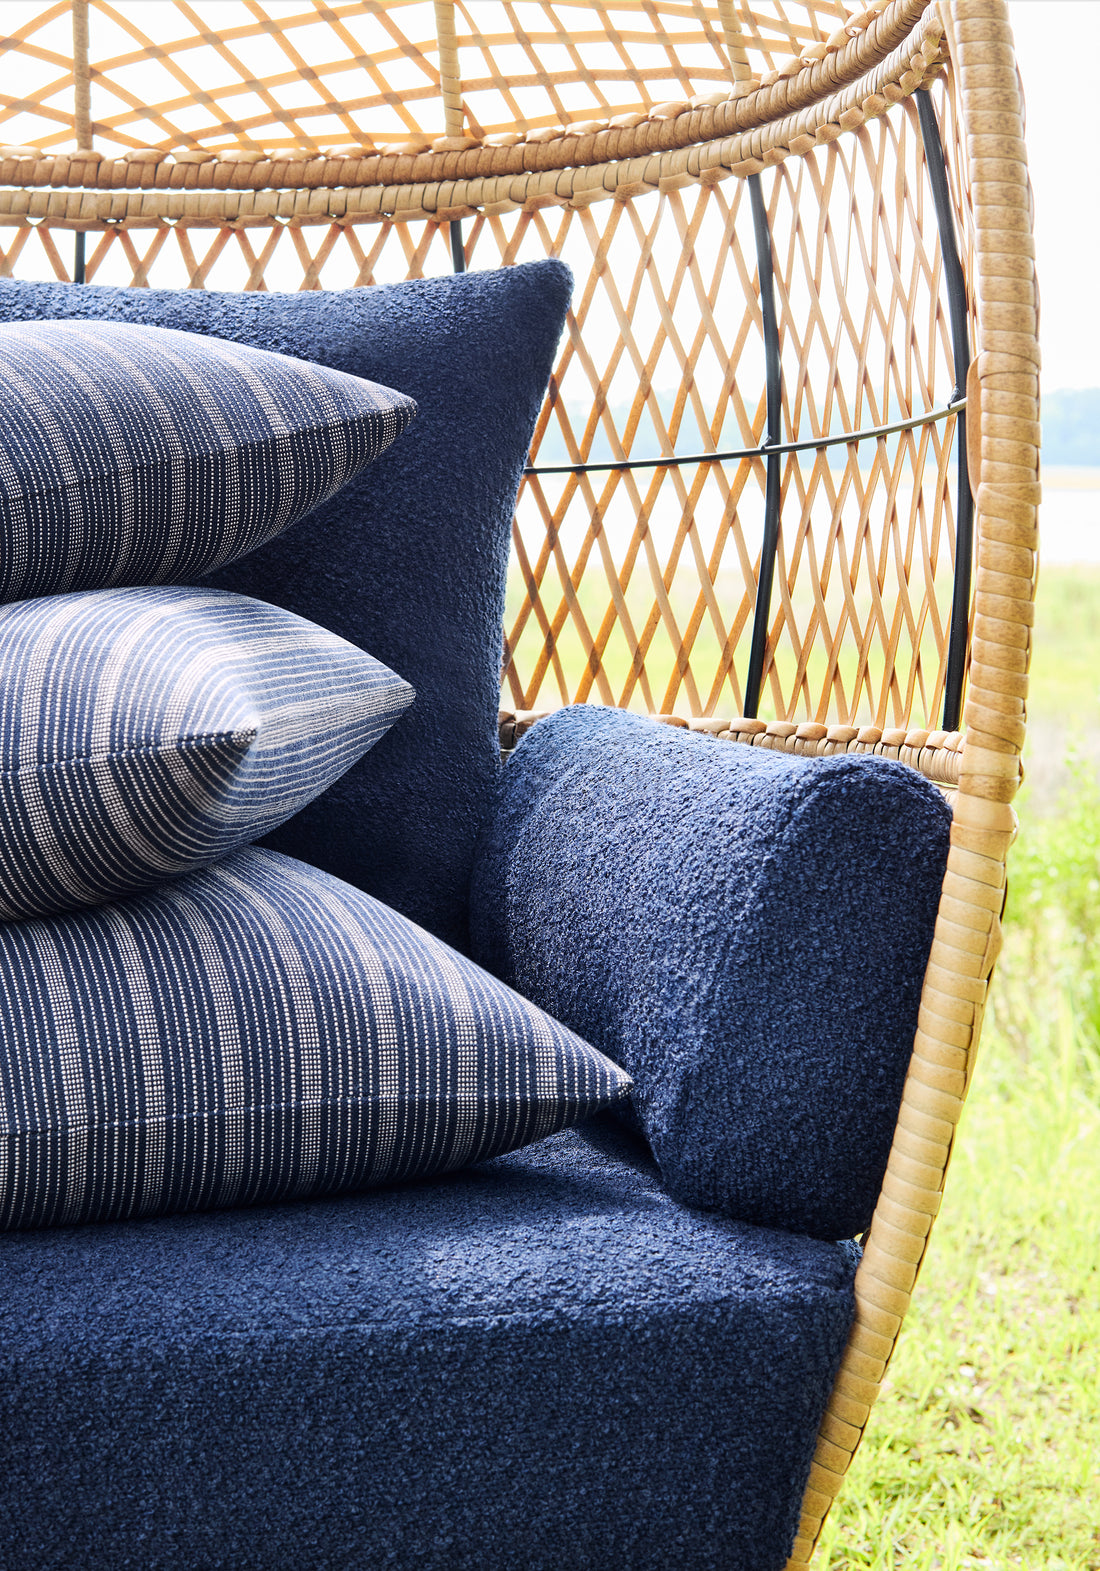 Pillows in Ebro Stripe fabric in navy color - pattern number W8511 - by Thibaut in the Villa collection